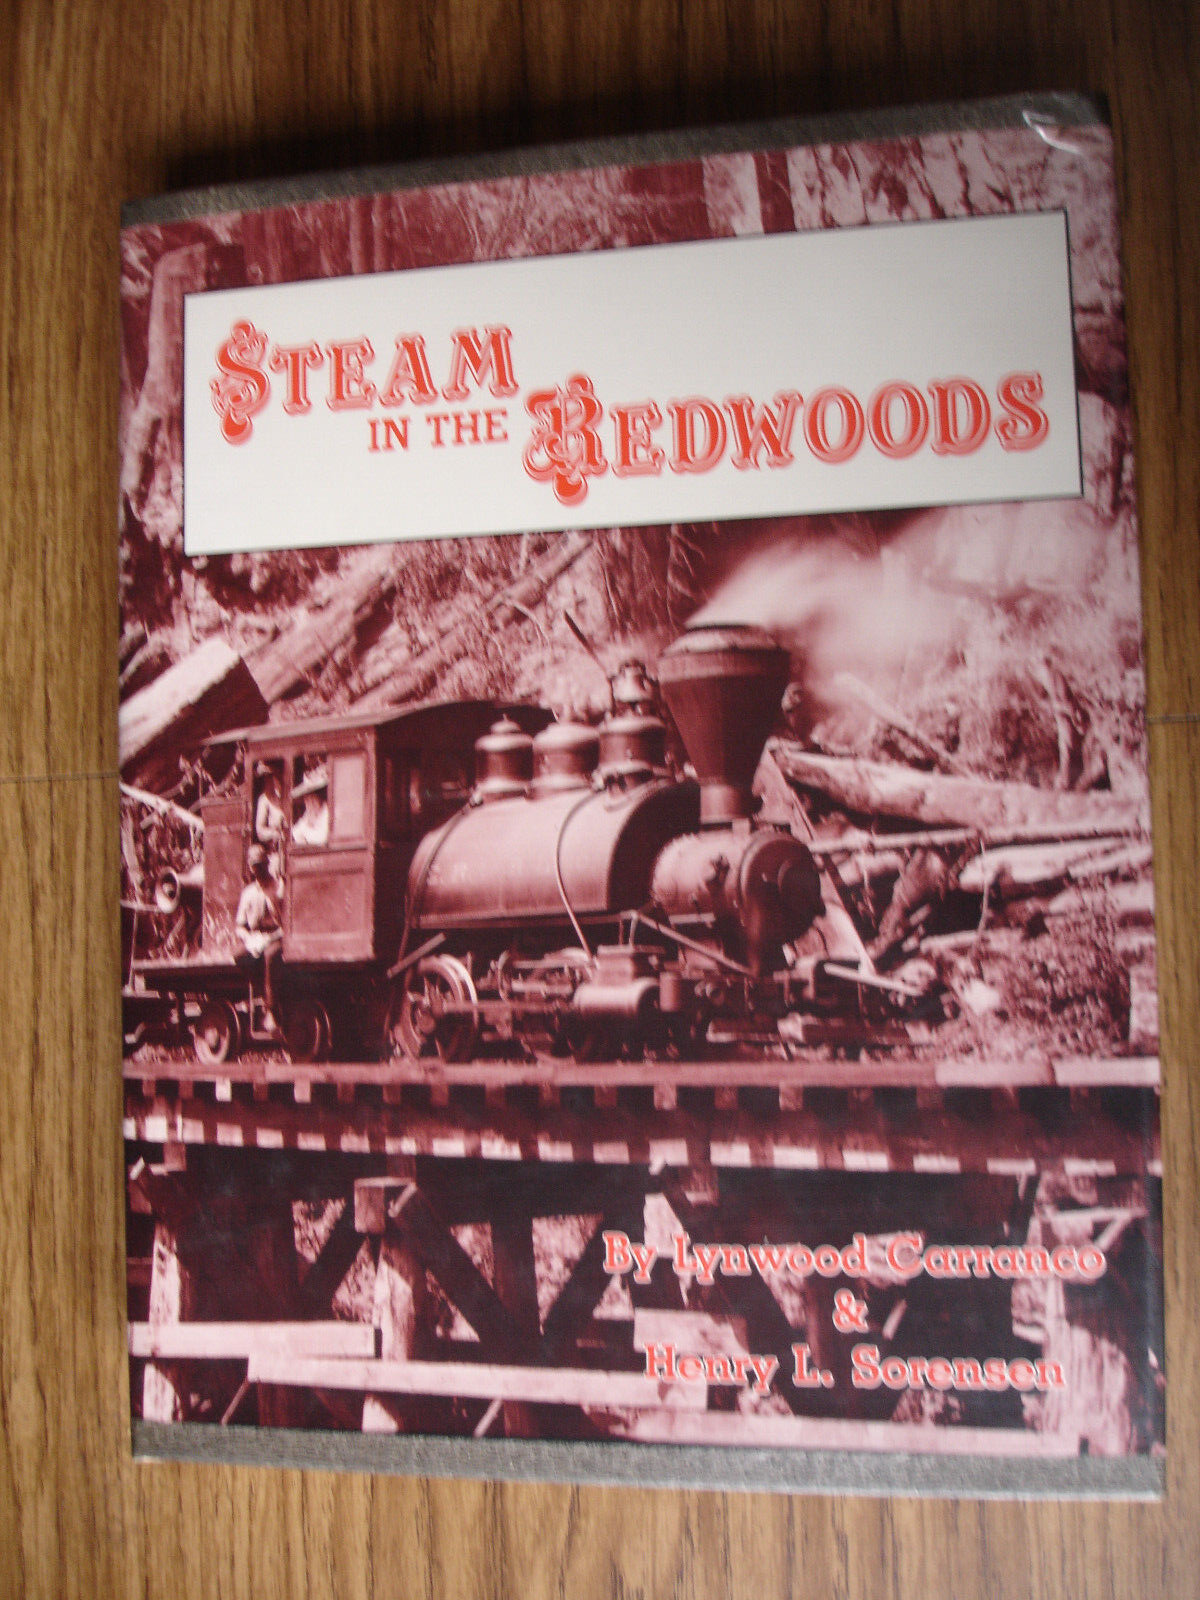 Steam In The Redwoods by Lynwood Carranco & Henry L. Sorensen. (Hard Cover 1988)